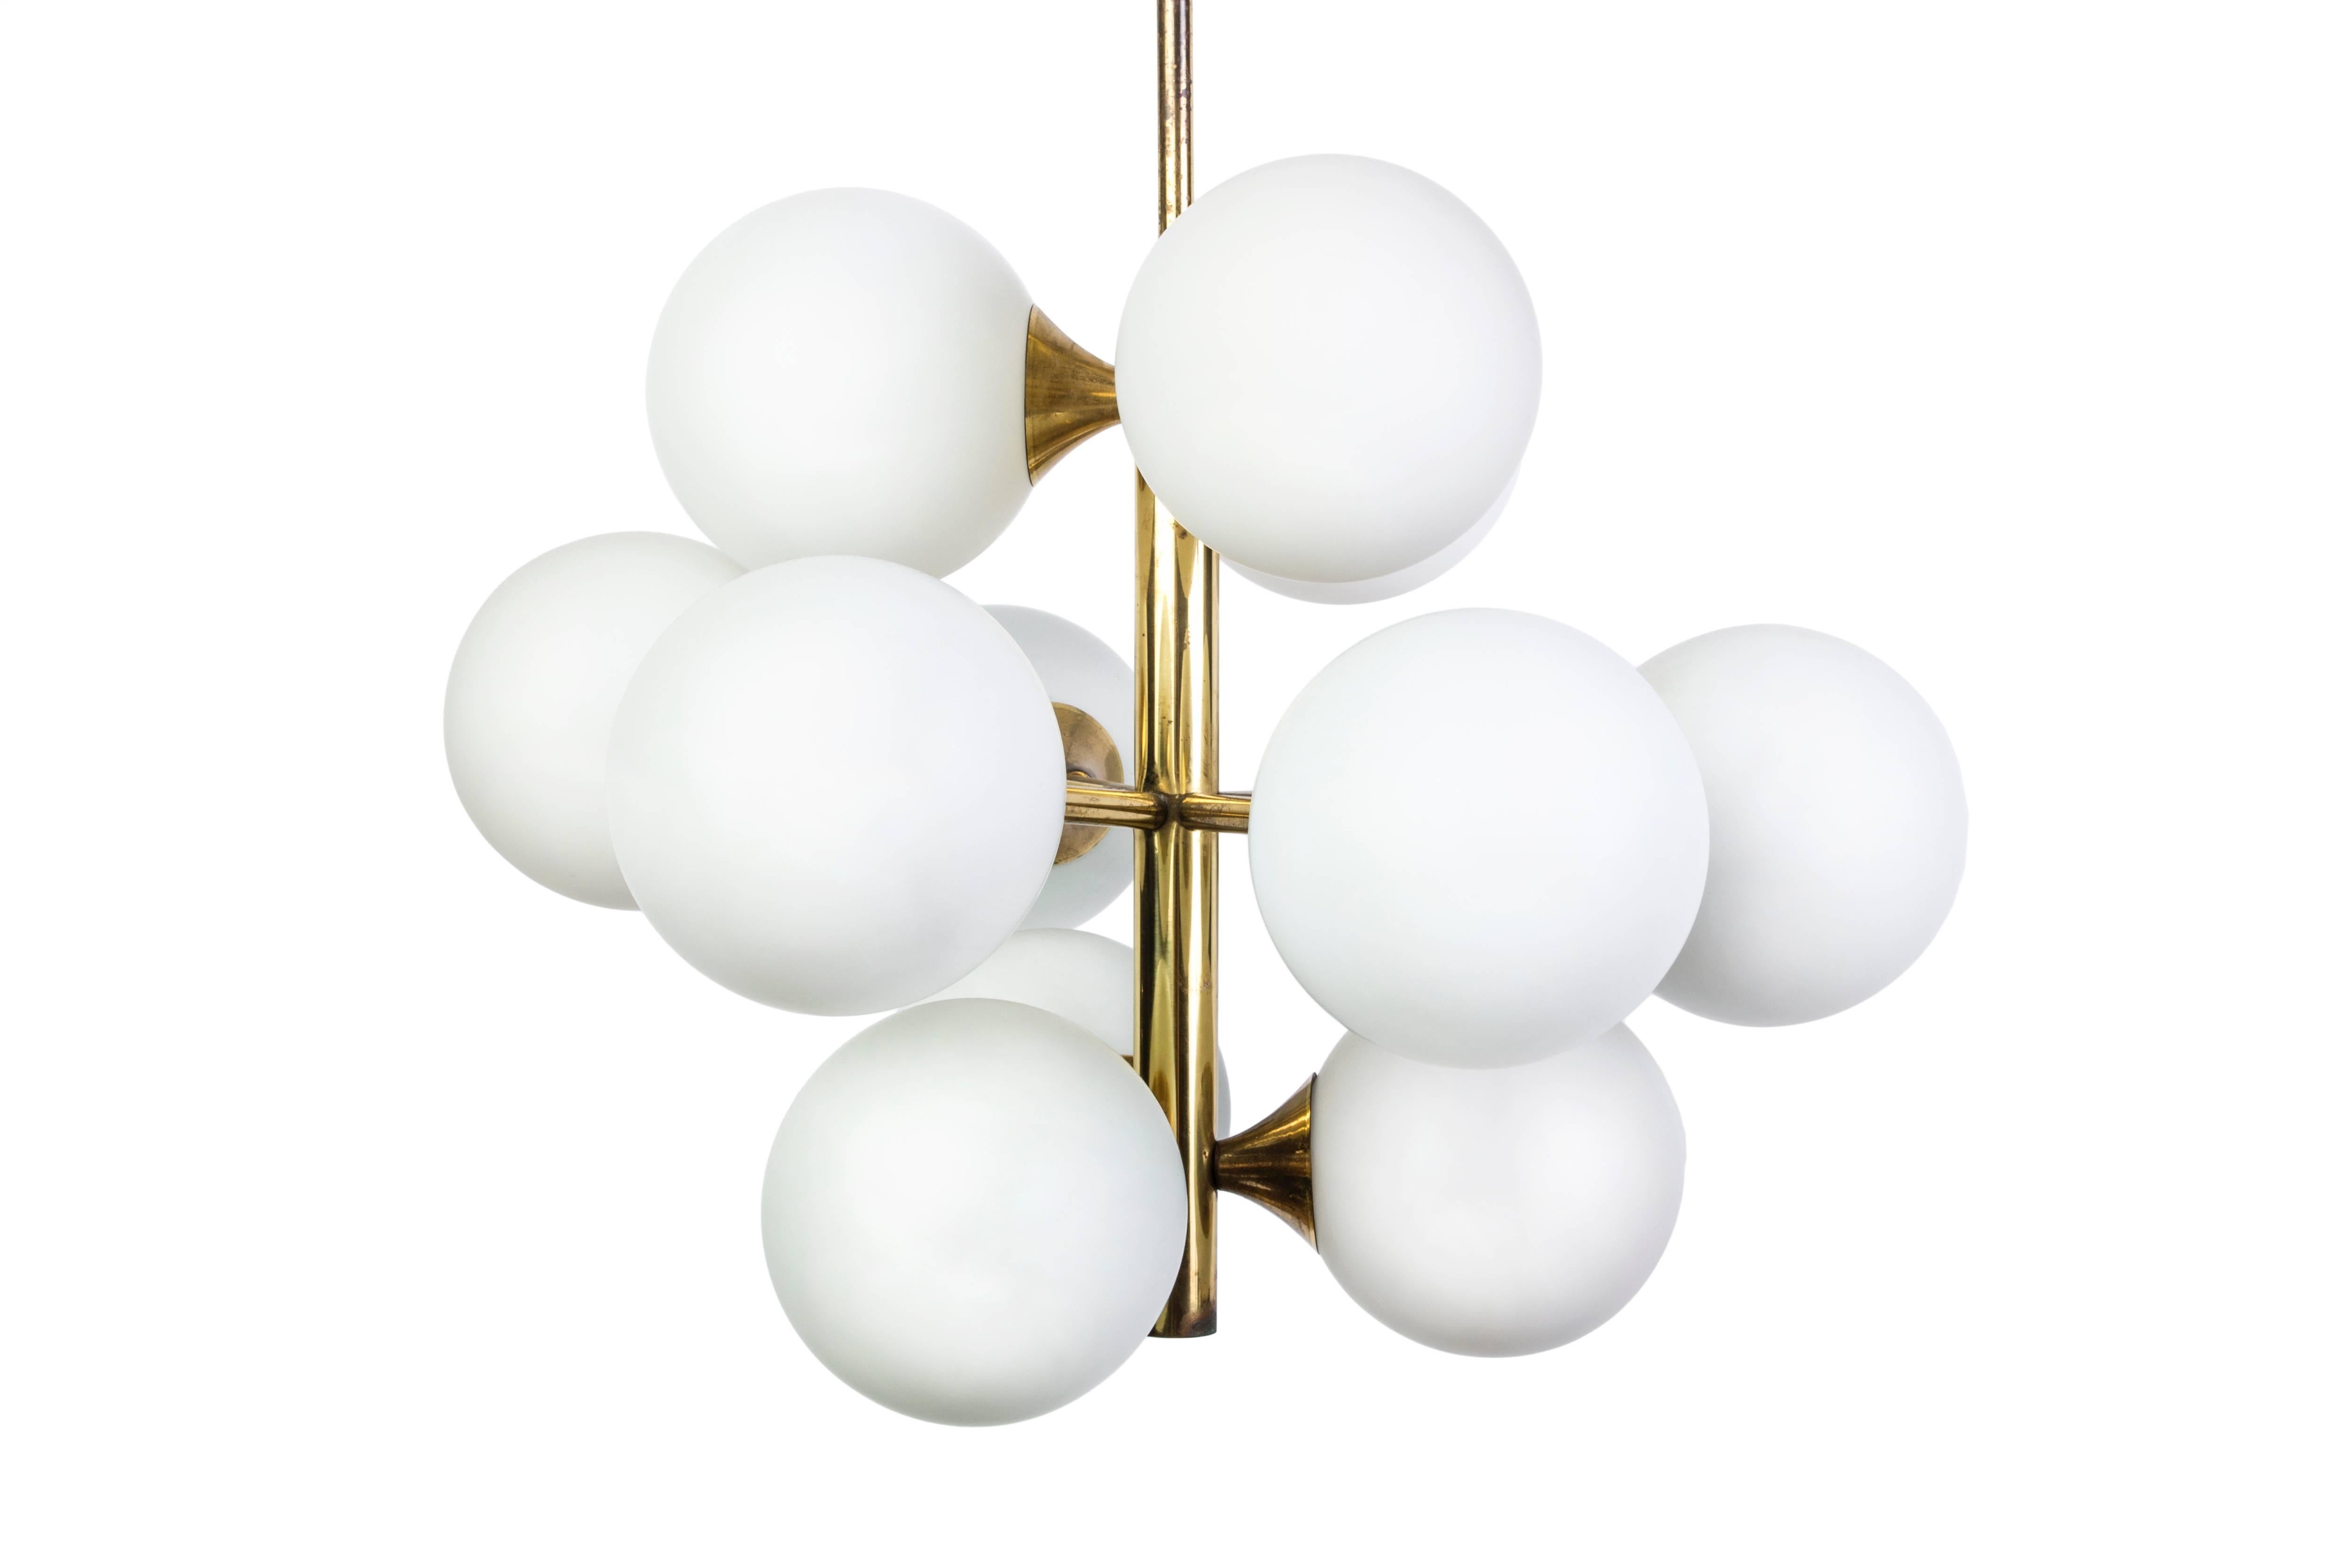 This wonderful Mid-Century Modernist Sputnik chandelier features a brass base with (12) opal glass bulbs. It is in excellent condition and has been newly rewired.

Made in Germany, circa 1960.